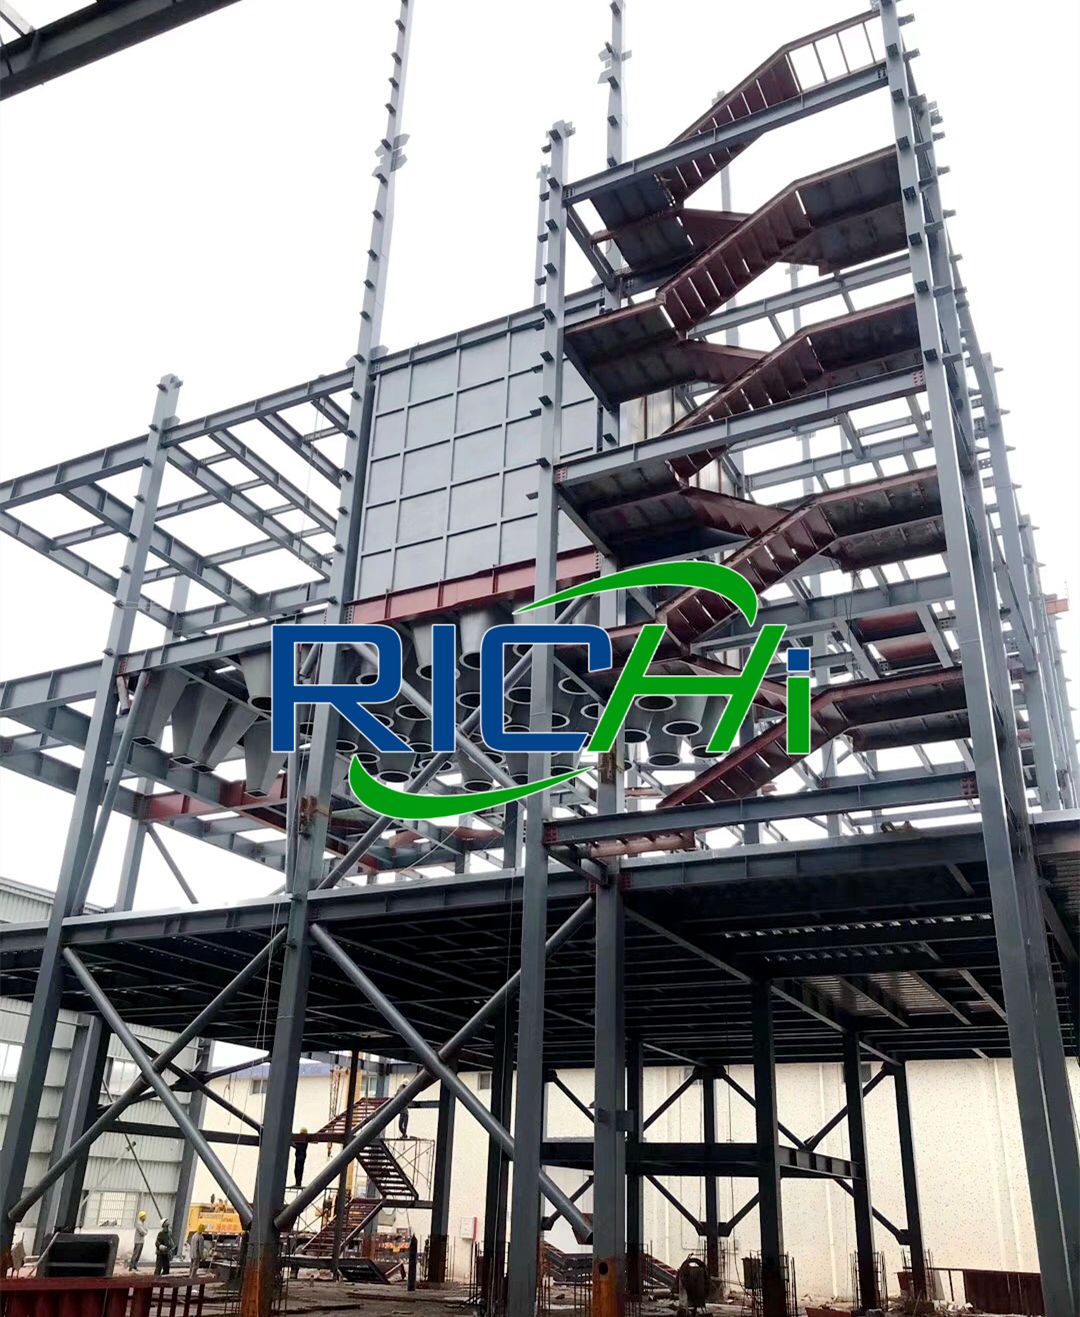 20 tph compound animal poultry cattle & fish feed processing plant machinery and equipment producing both mash and pellets manuf animal feed processing industry